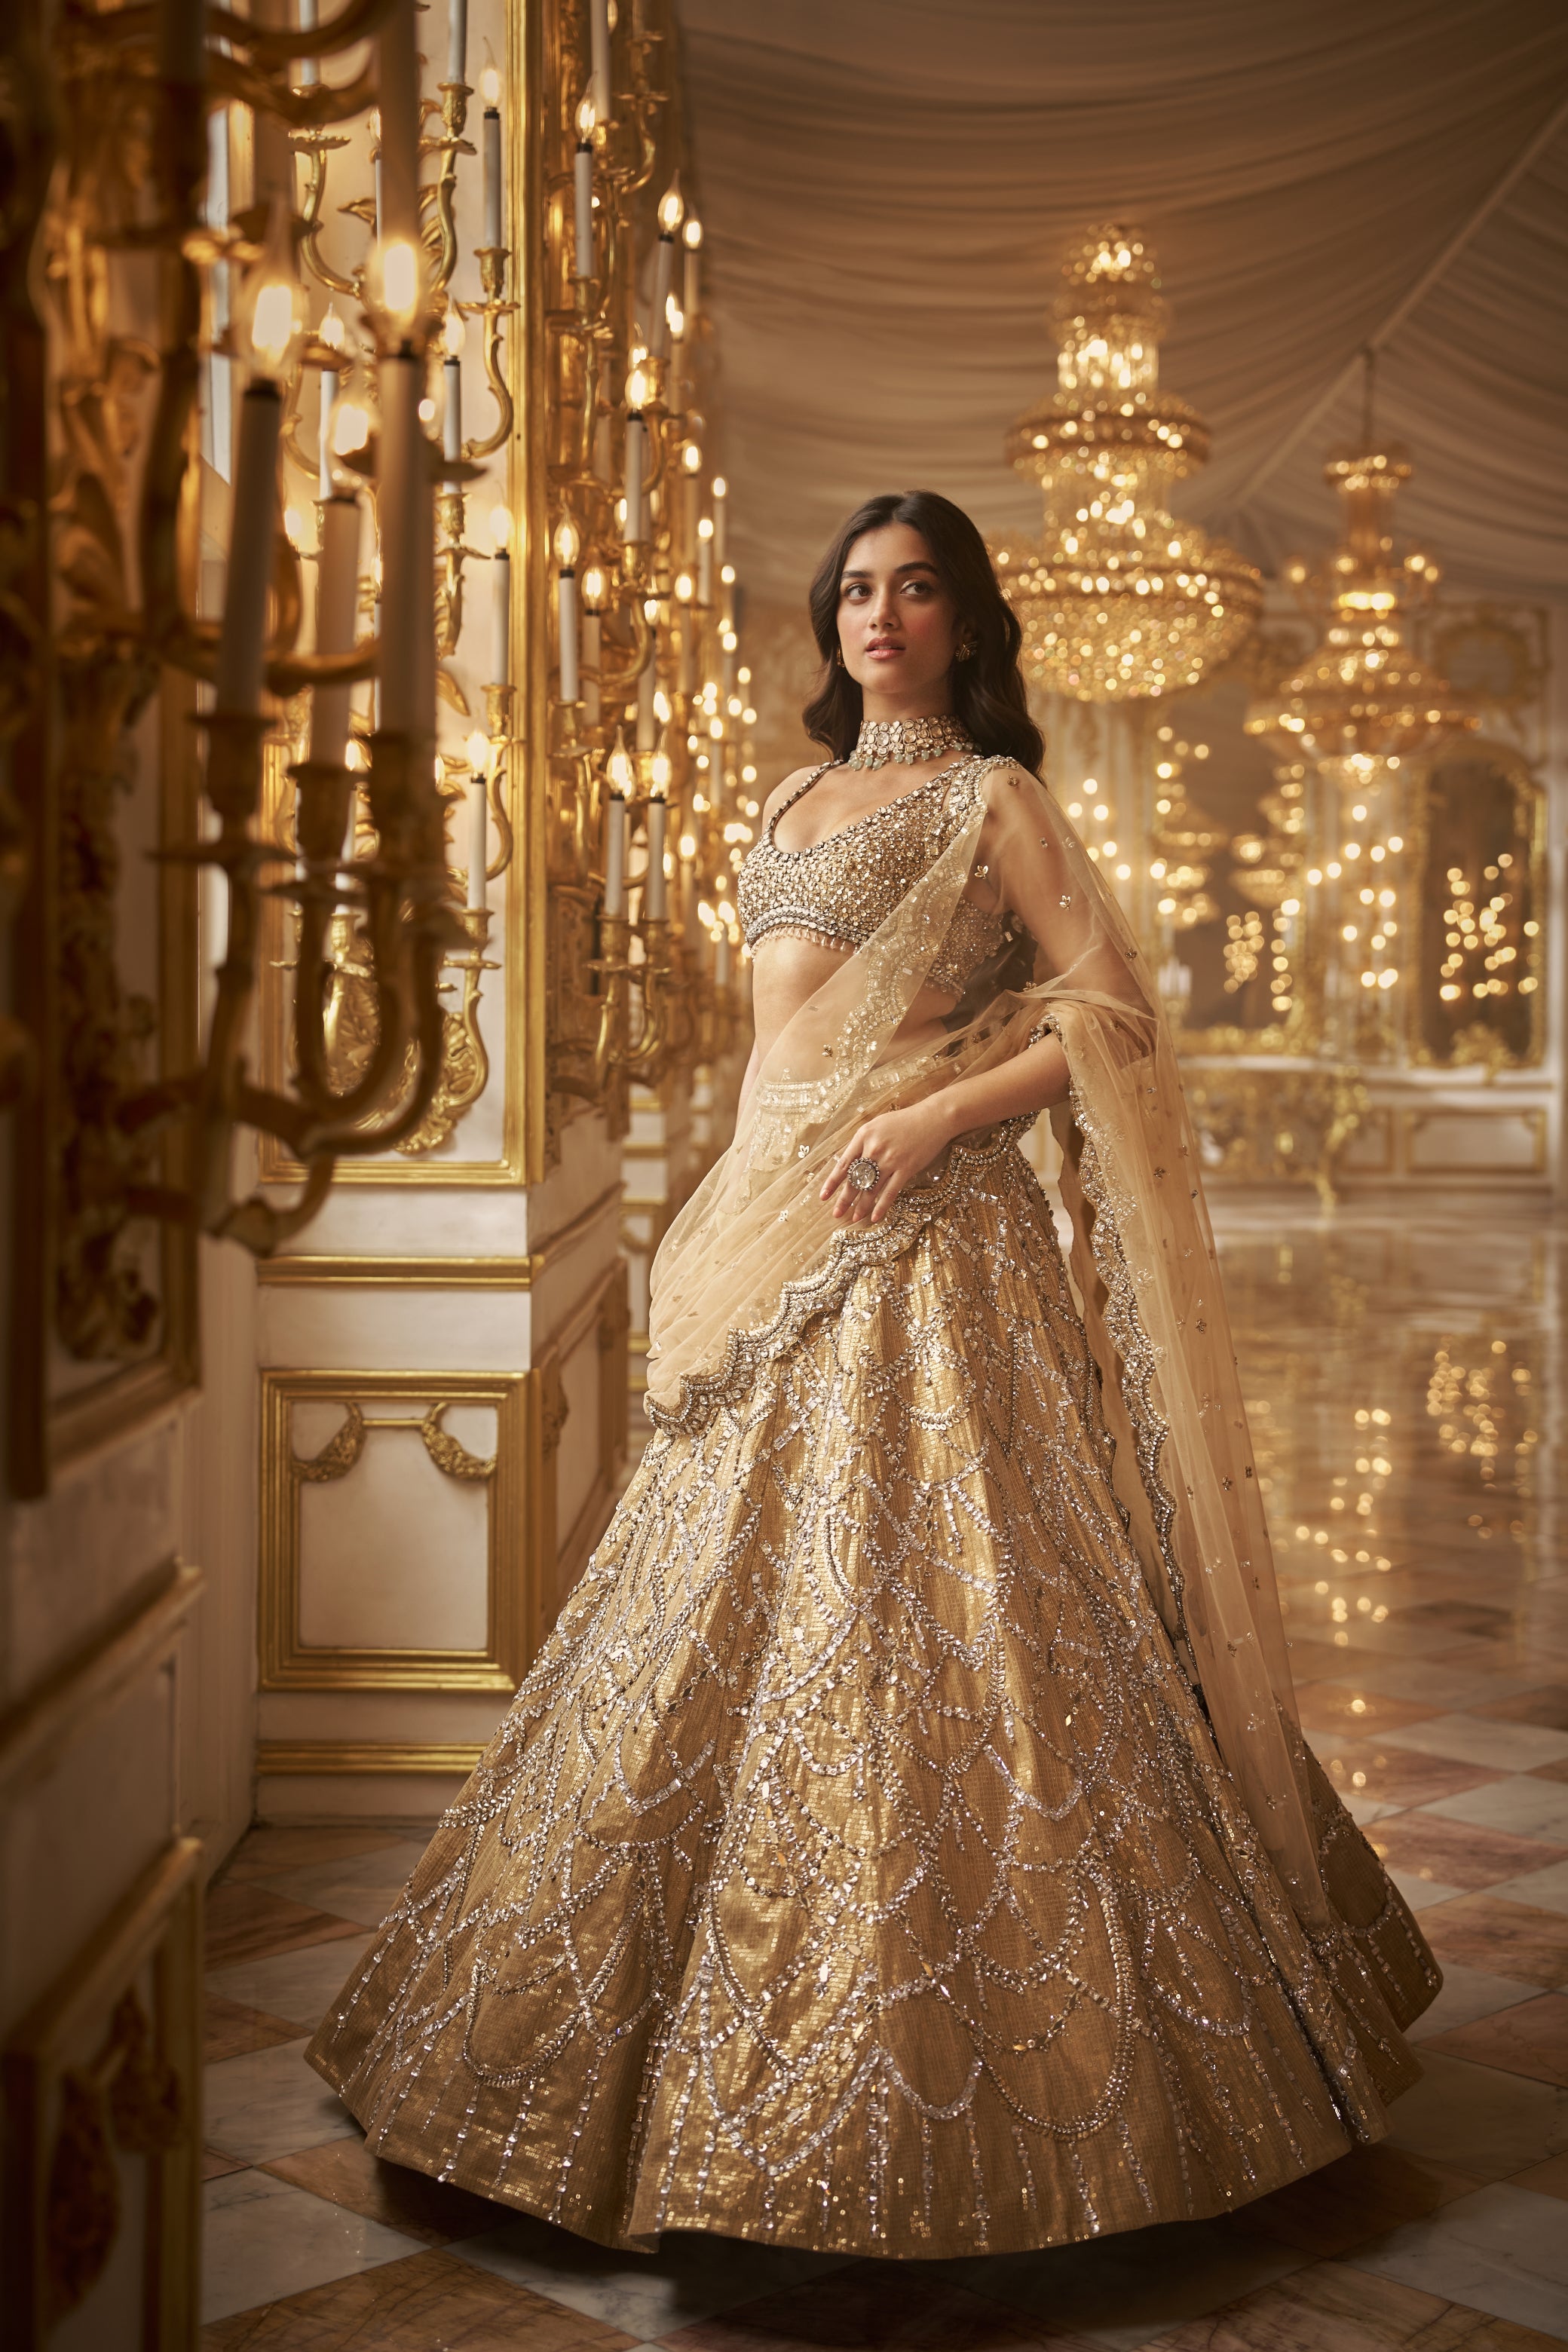 Stunning Reception Lehengas In Gold That Wowed Us! | Indian bridal wear,  Indian bridal outfits, Bride attire